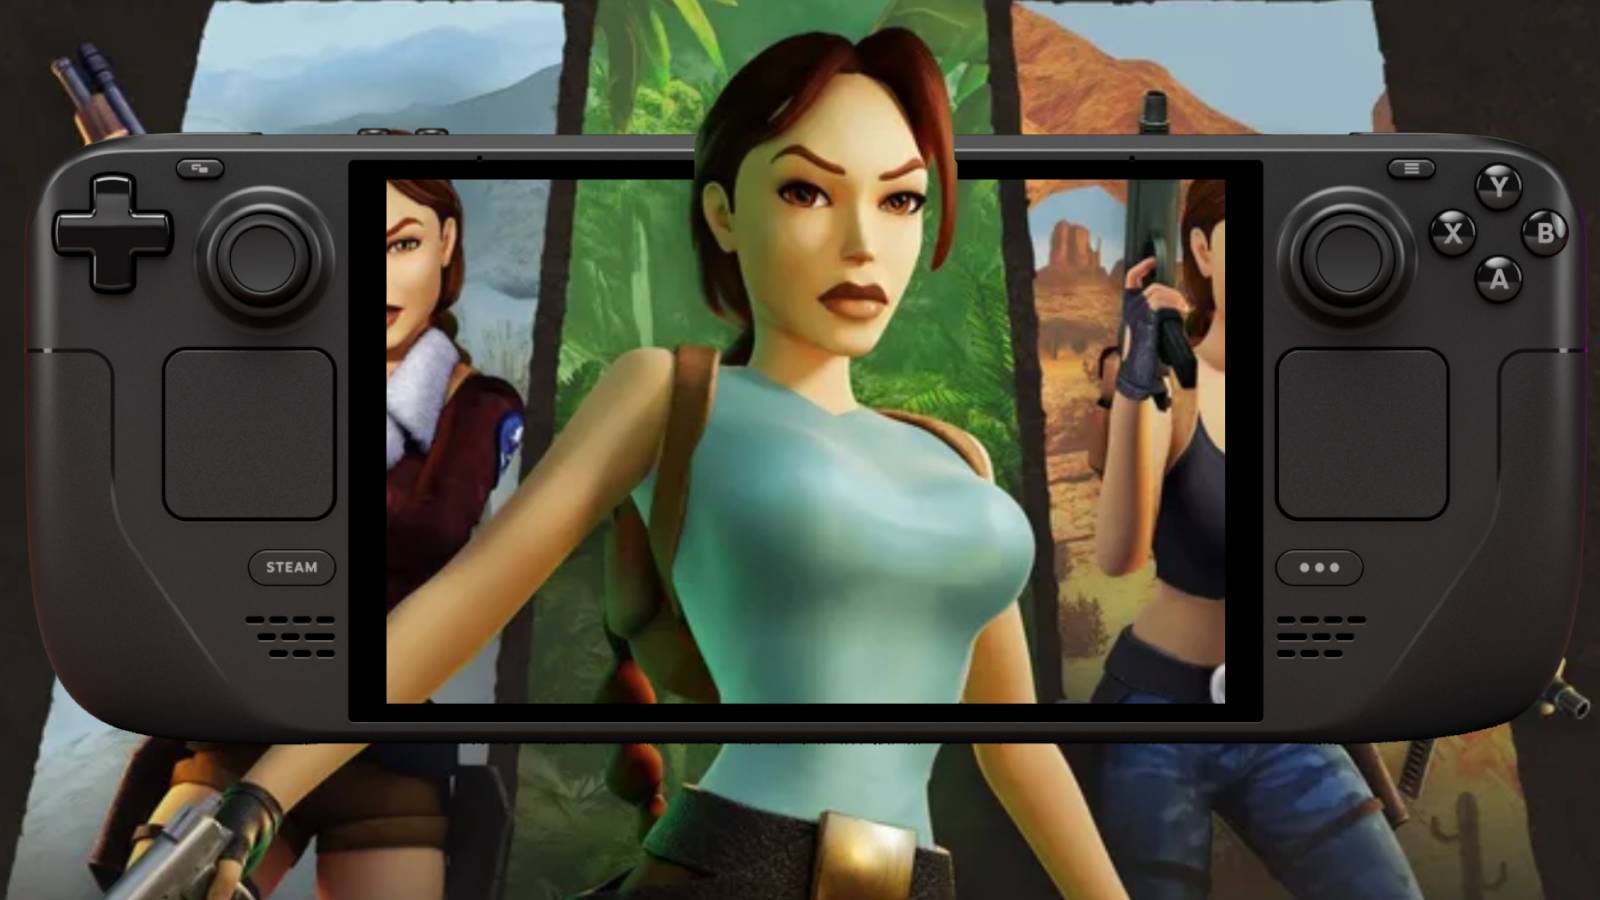 An image of Lara Croft from Tomb Raider 1-3 Remastered on the screen of a Steam Deck OLED.